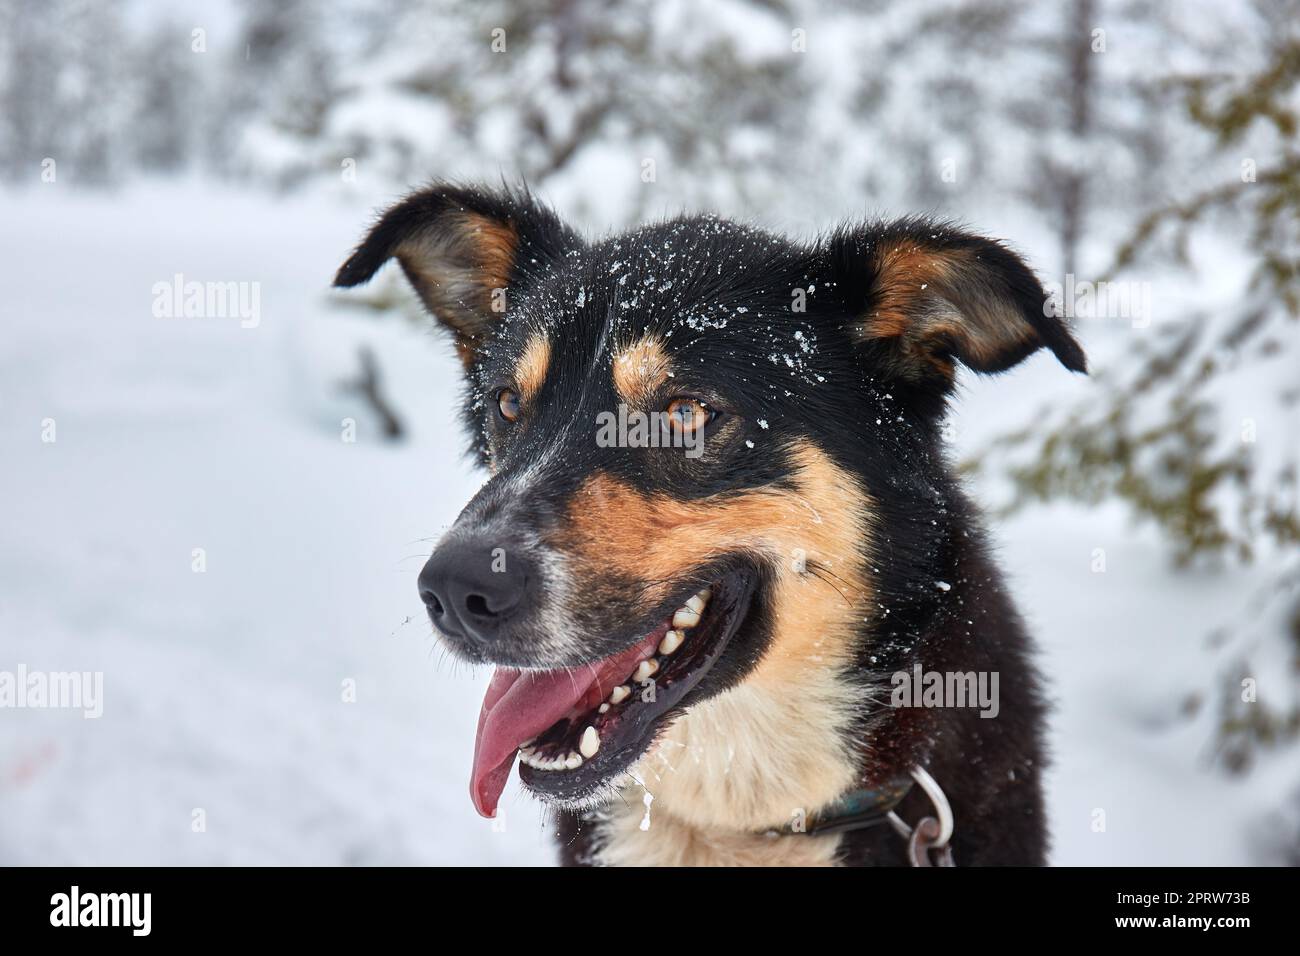 Cute dog playful in the snow Stock Photo